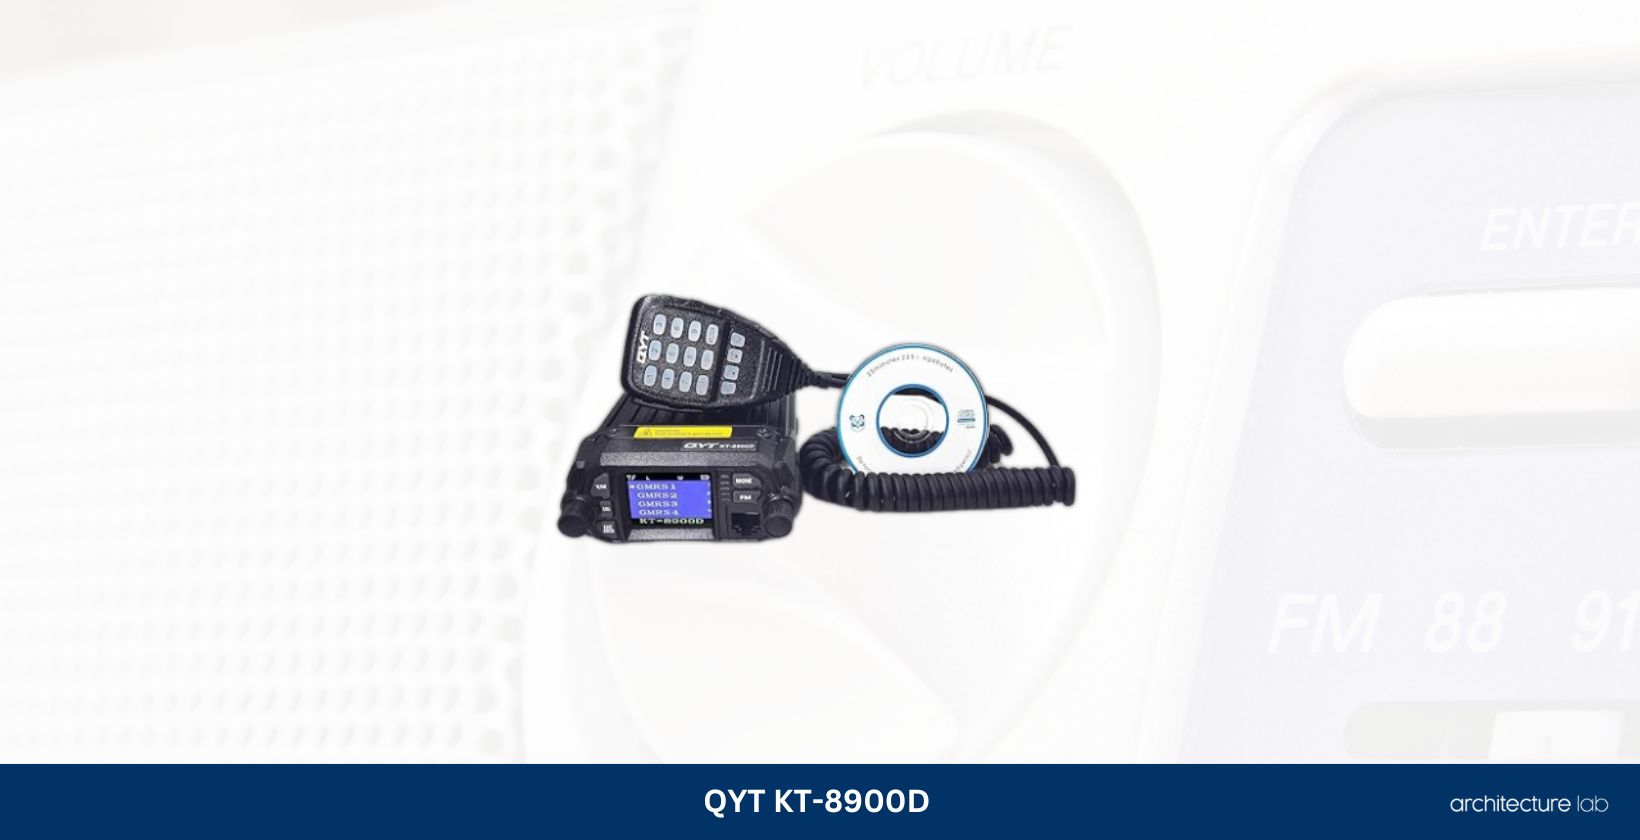 Qyt kt 8900d 25w dual band mini car gmrs radio mobile transceiver